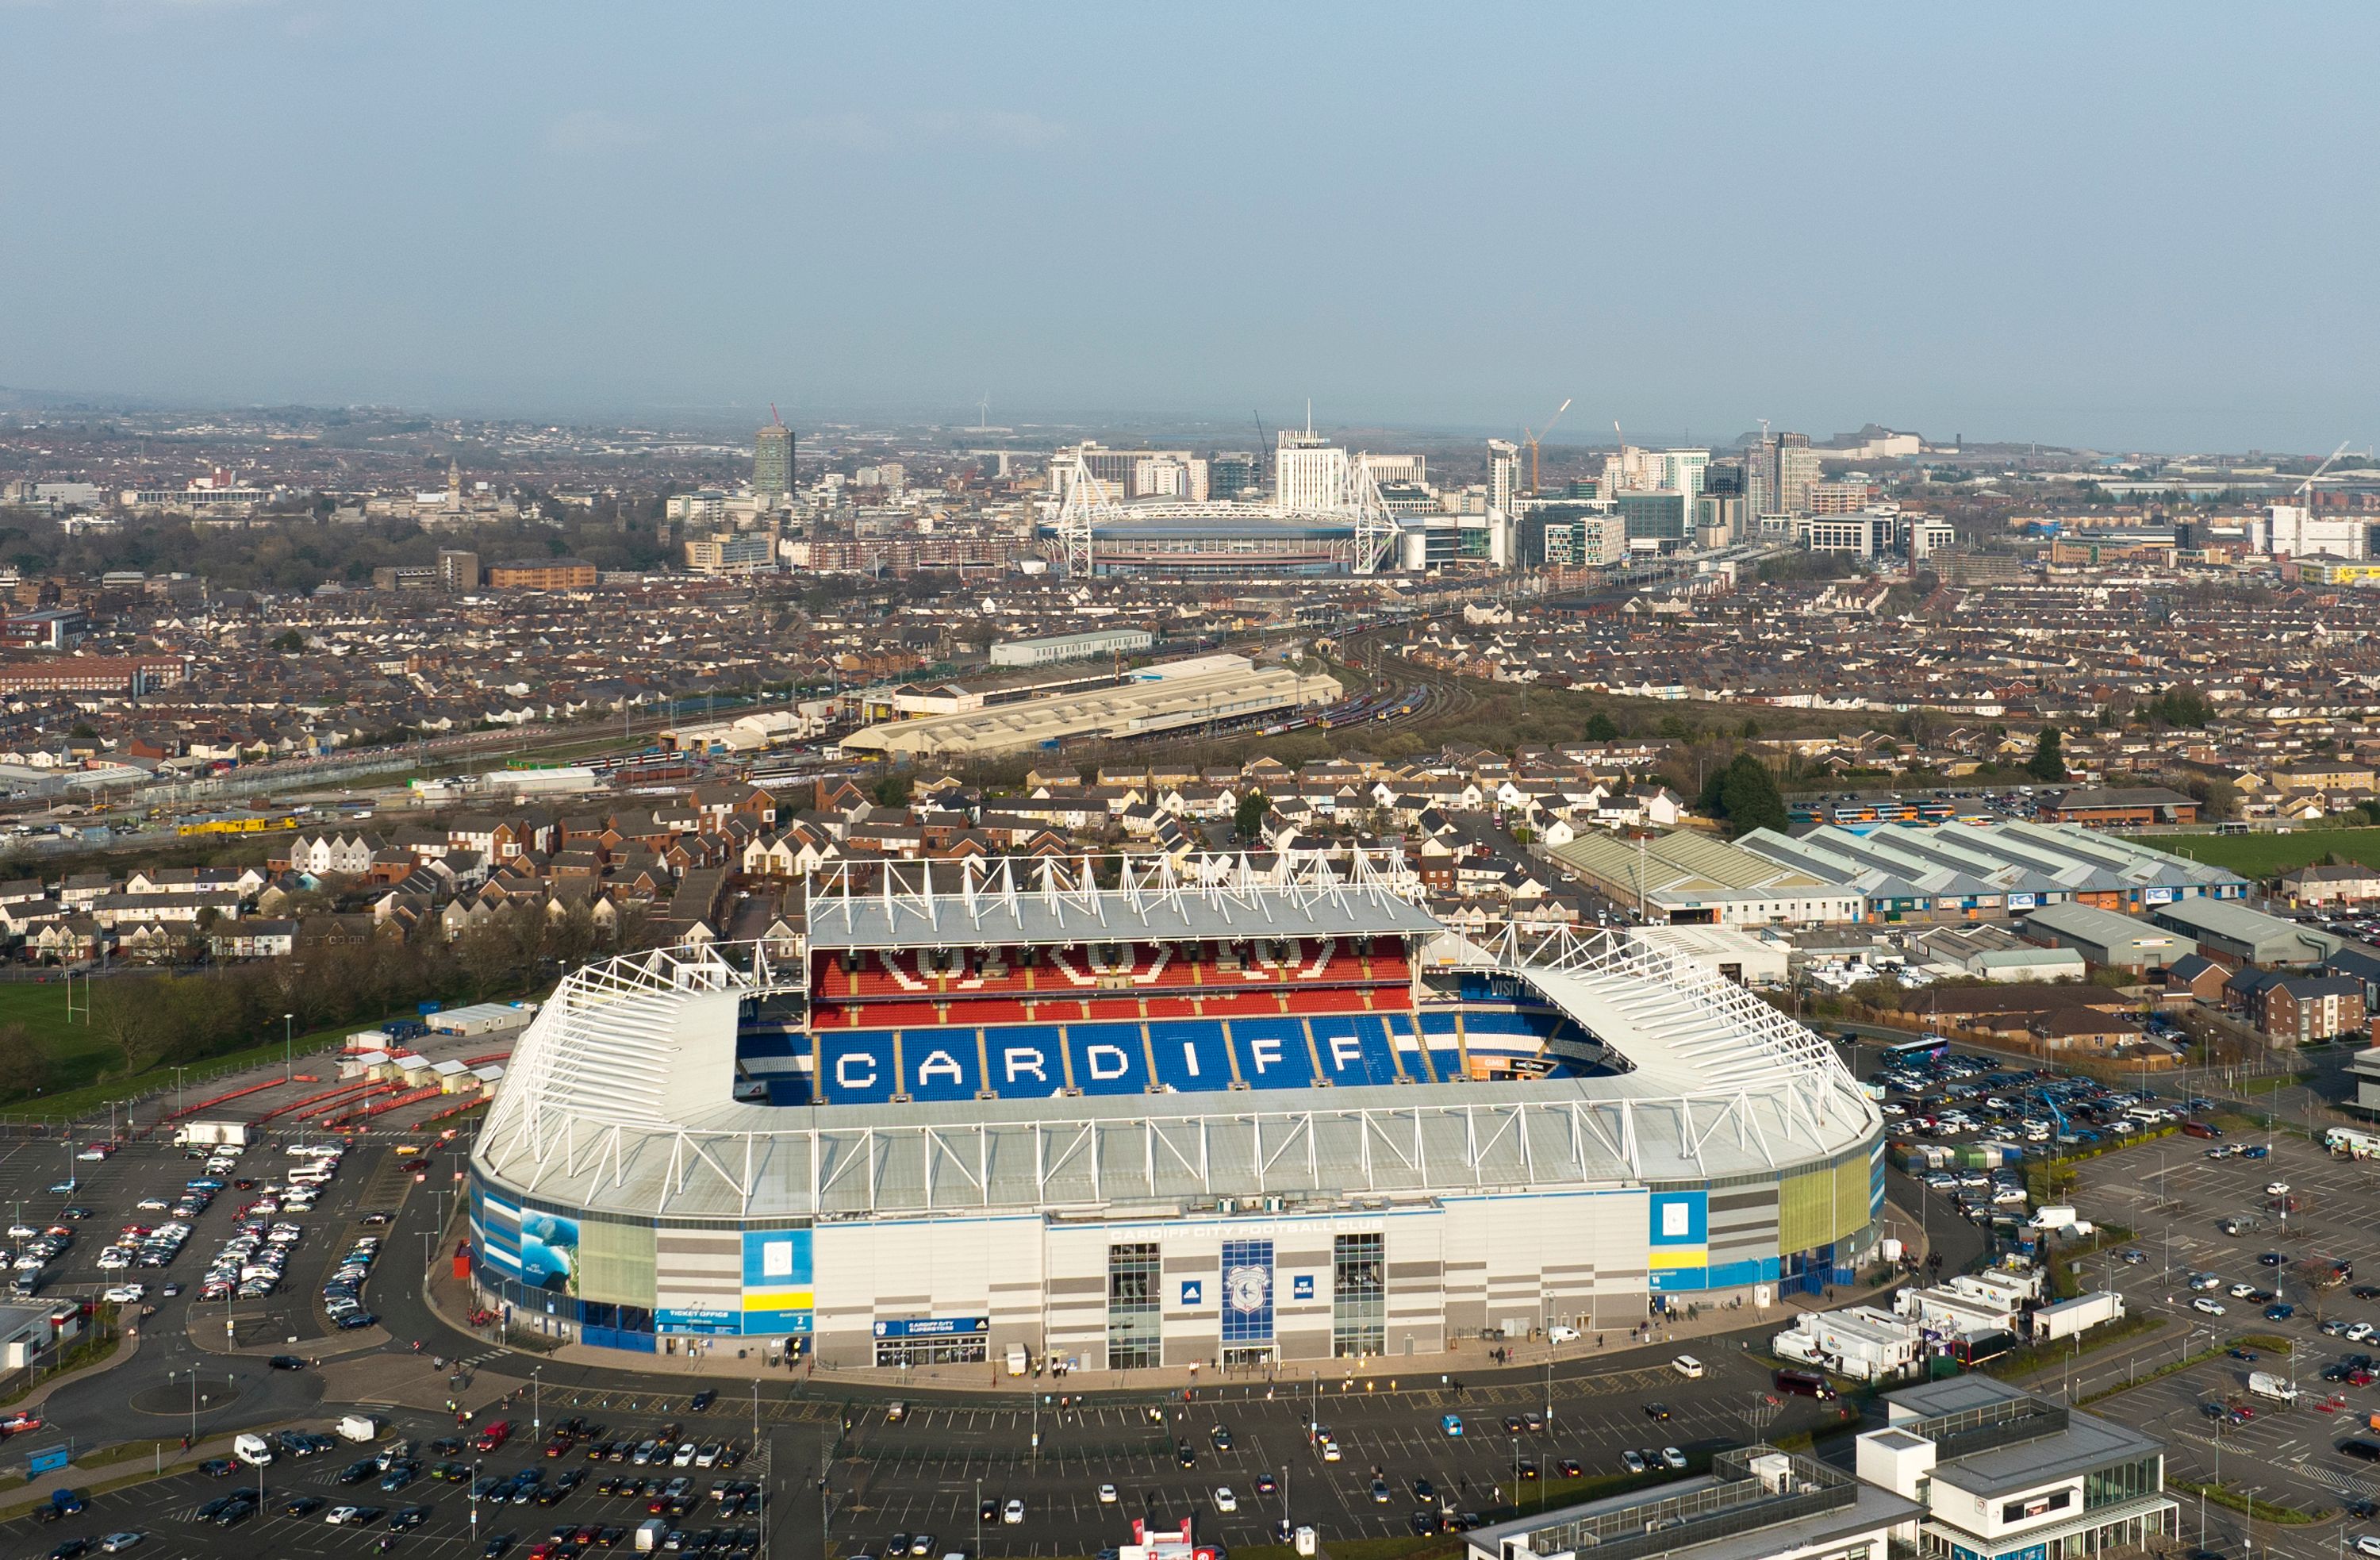 An aerial view of Cardiff City Stadium